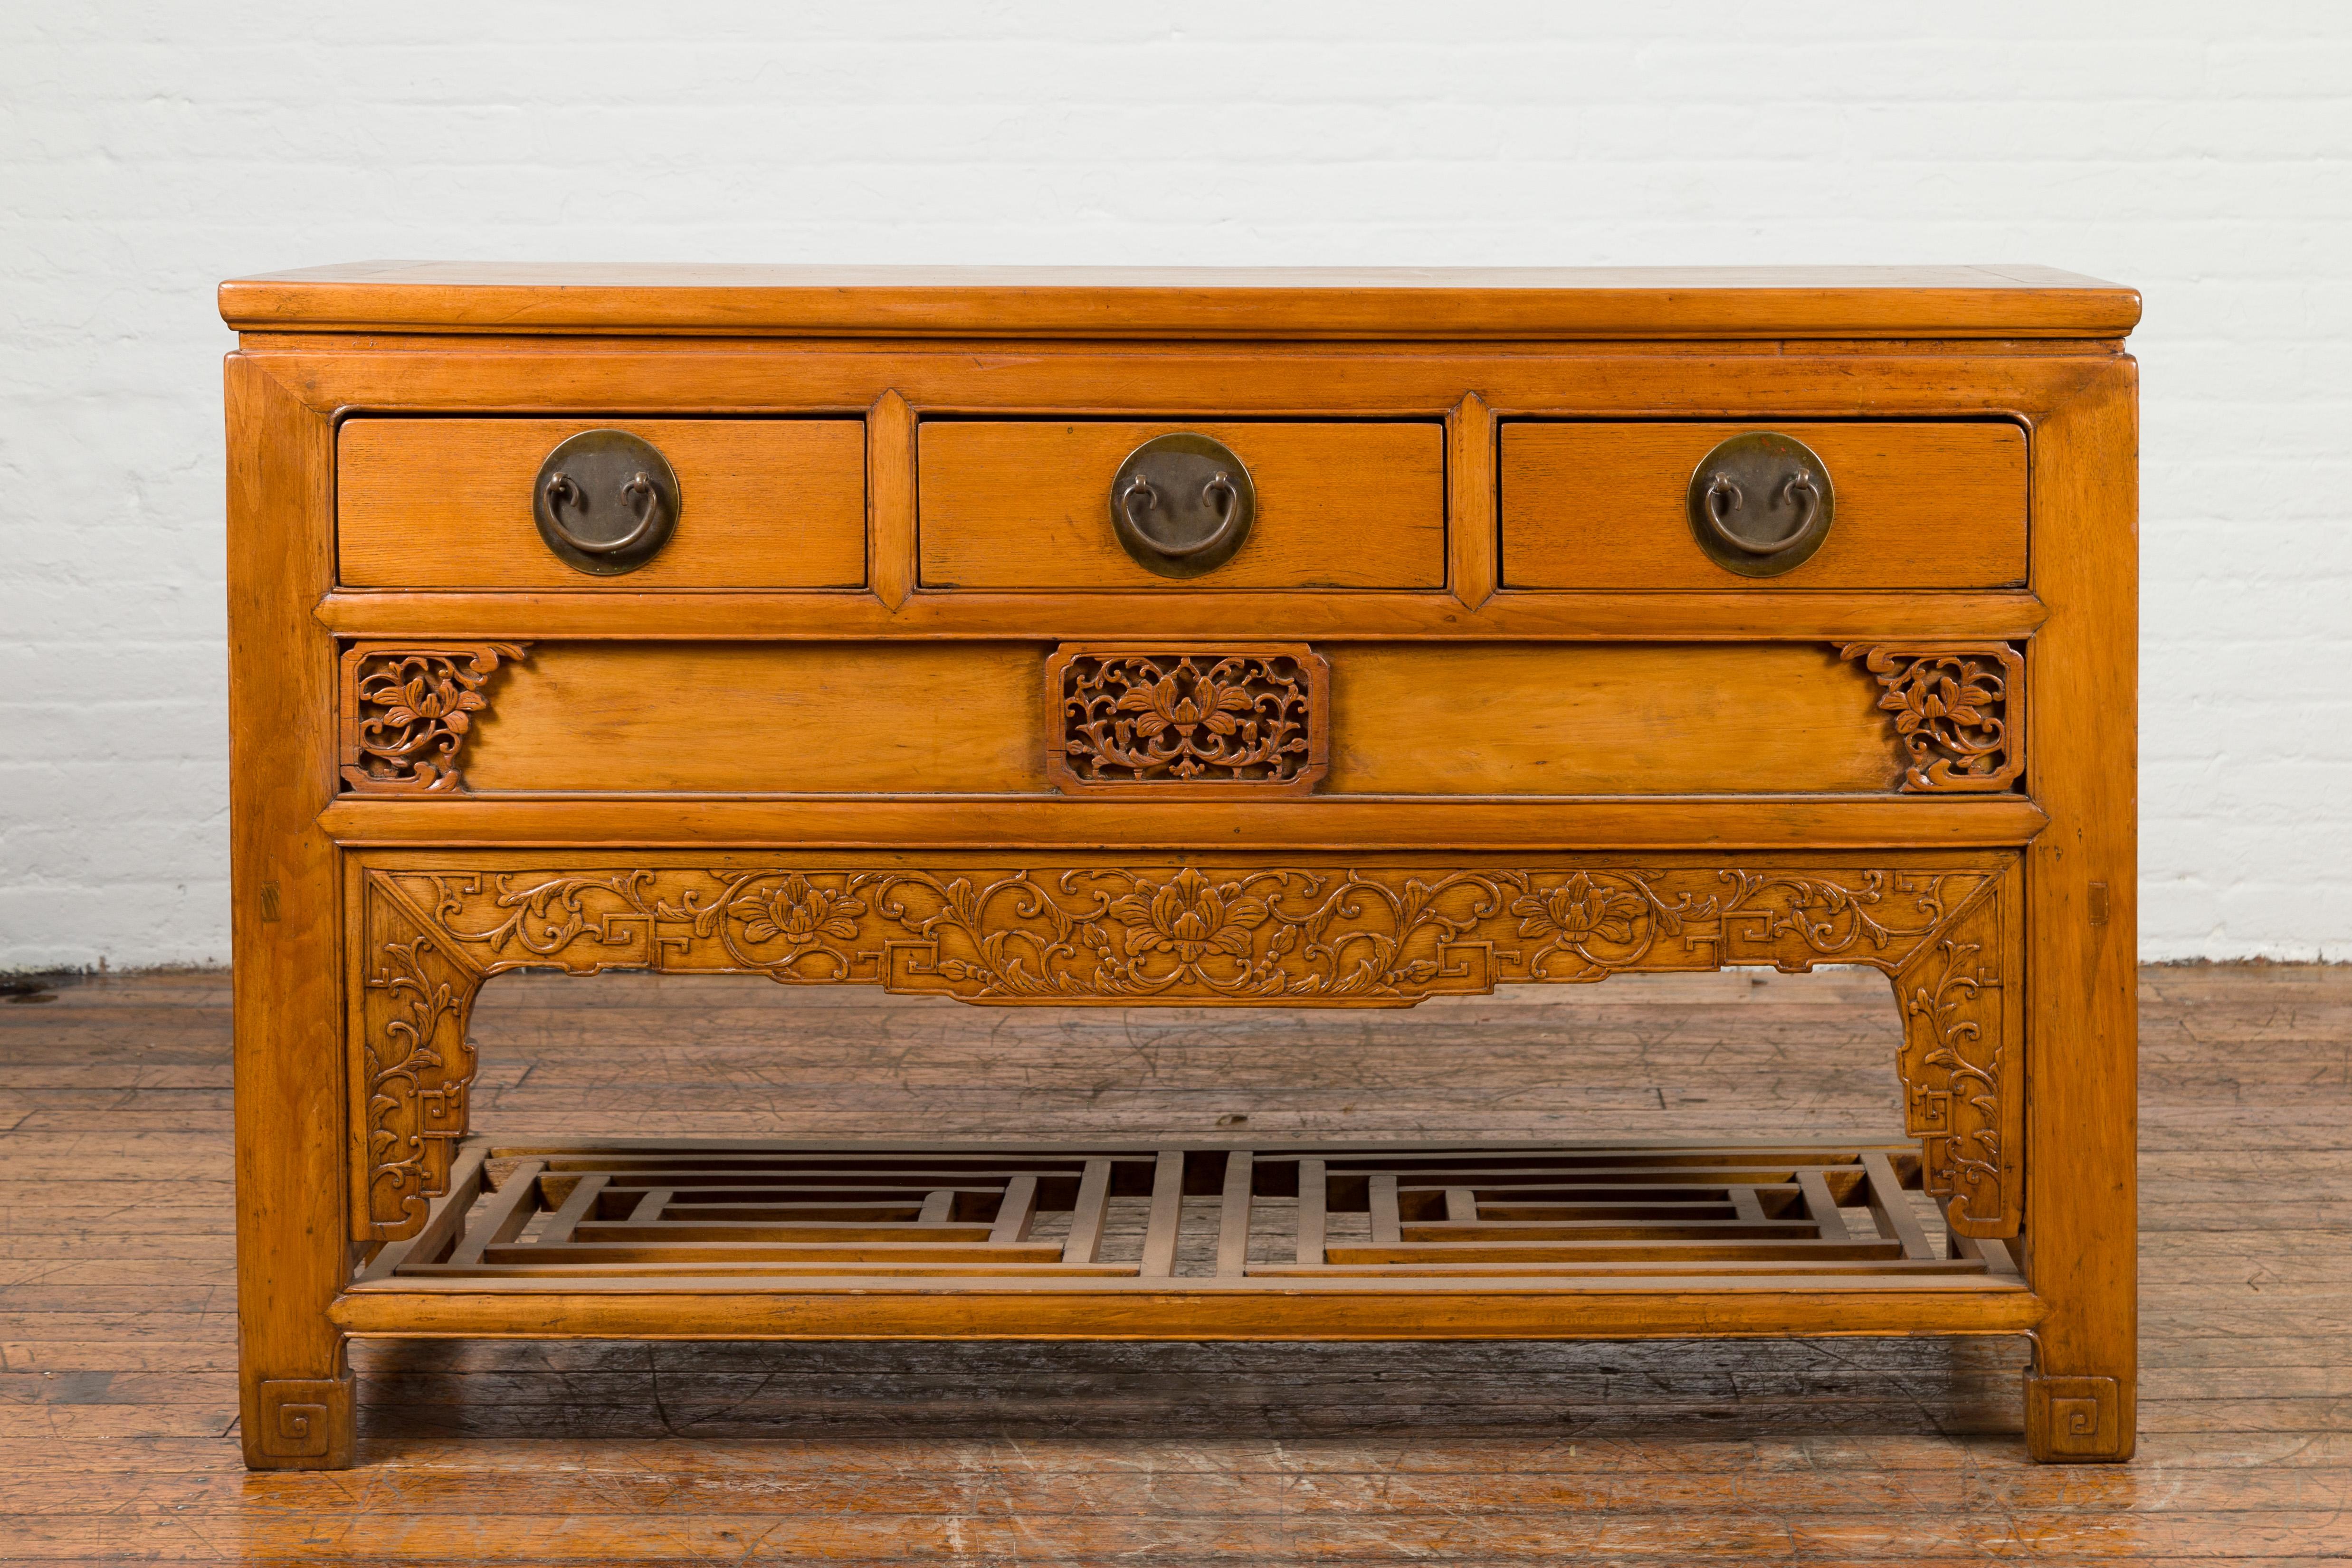 A Chinese Qing Dynasty period carved wooden waisted sideboard from the 19th century, with three drawers and lower shelf. Created in China during the Qing Dynasty, this waisted sideboard features a rectangular top with central board, sitting above